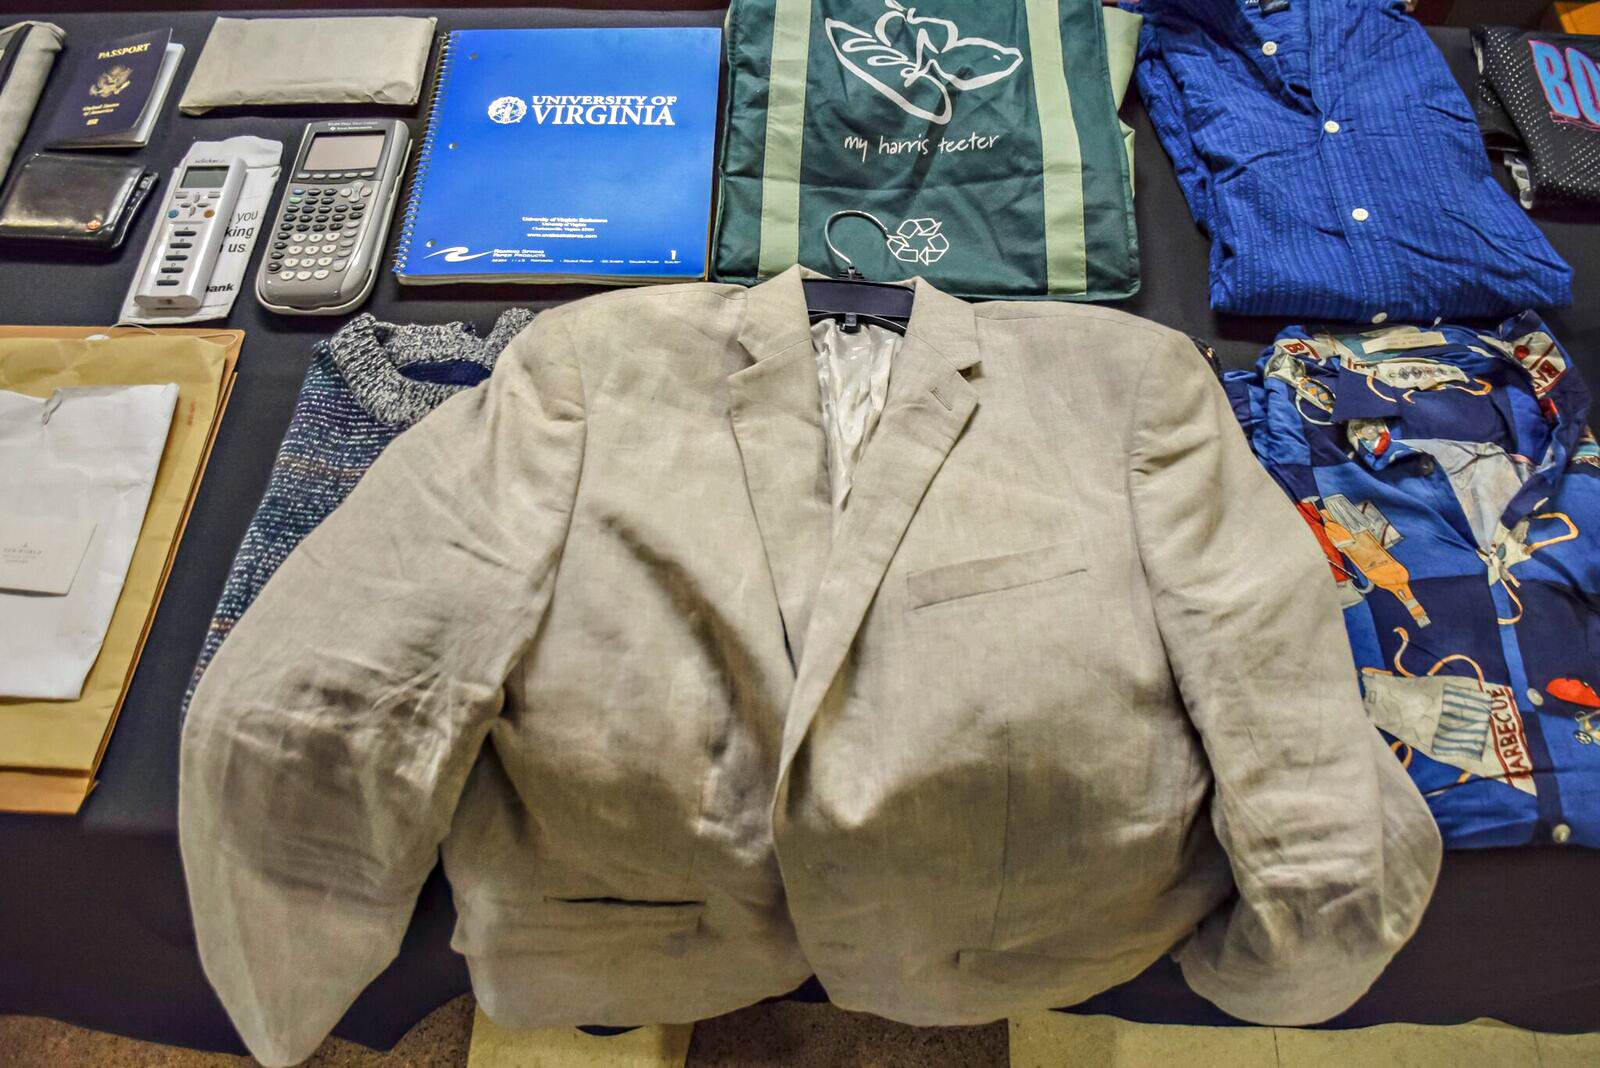 PHOTO: Otto Warmbier's belongings from his trip to North Korea, including the jacket he wore, were displayed at the funeral service for Warmbier at Wyoming High School in Wyoming, Ohio, June 22, 2017. 